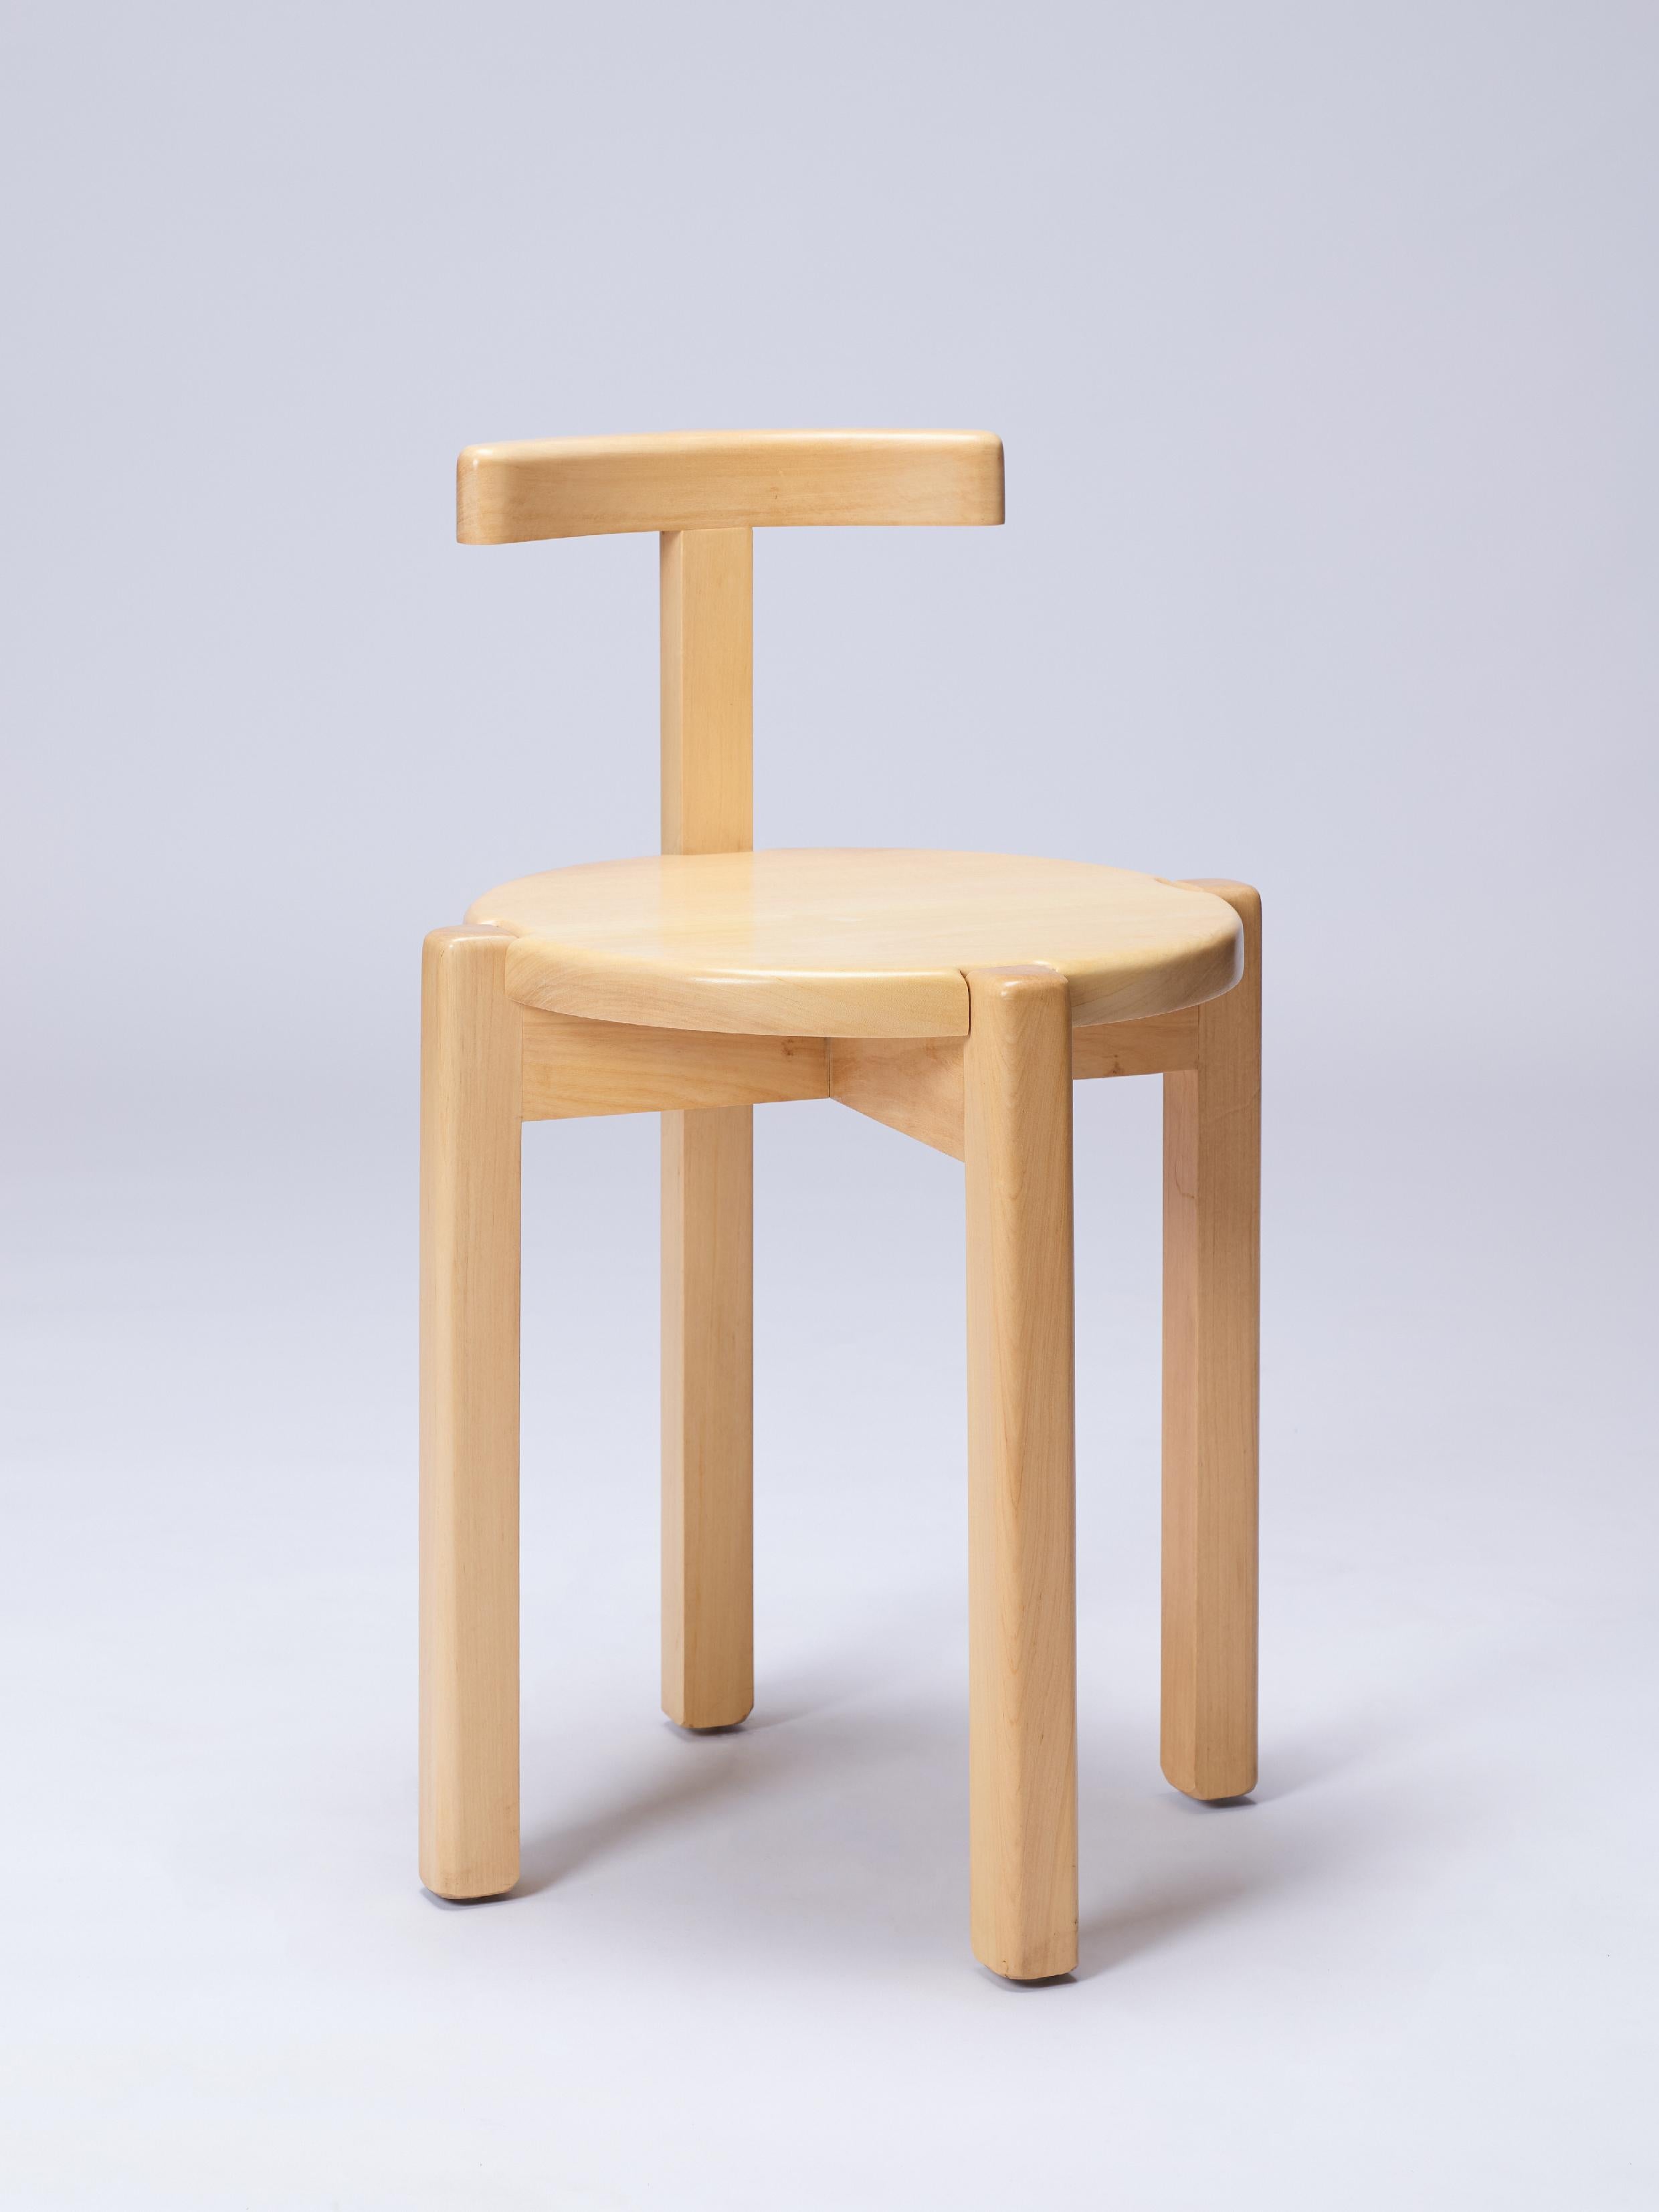 The Orno chair is part of the Orno collection, our first to be entirely made of hardwood. All pieces were designed under a same construction system that consists of basic structural elements –columns, beams, support planes– and whose joints are